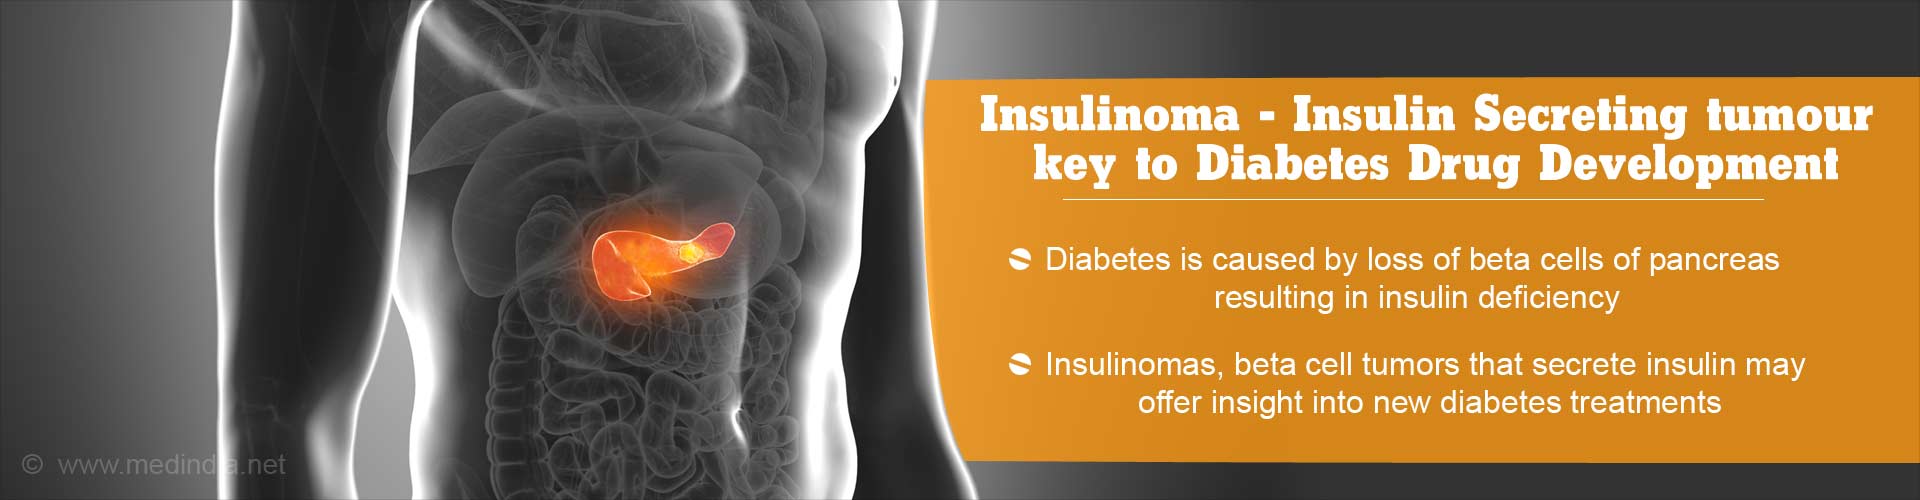 Insulinoma - Insulin secreting tumour key to diabetes drug development
- Diabetes is caused by loss of beta cells of pancreas resulting in insulin deficiency
- Insulinomas, beta cell tumors that secrete insulin may offer insight into new diabetes treatments